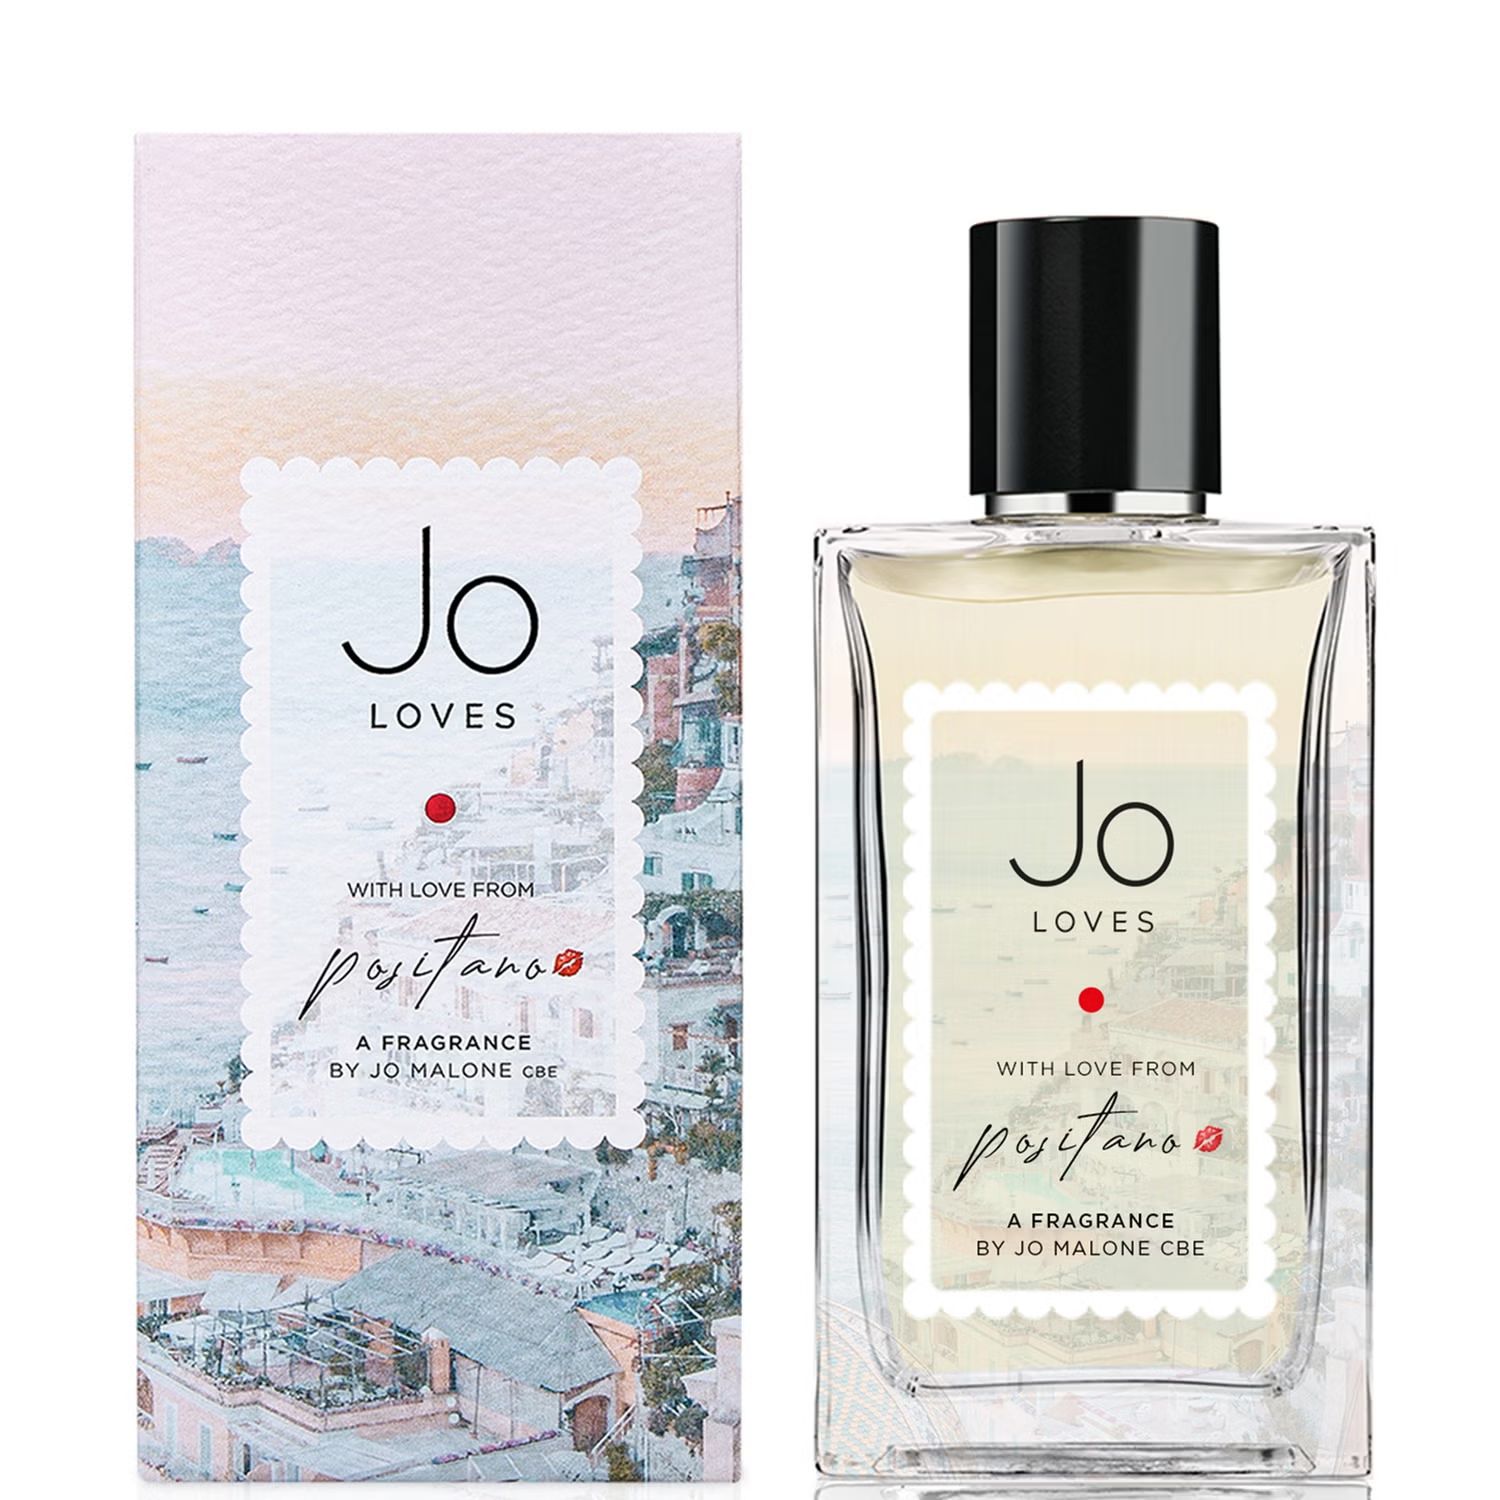 Jo Loves A Fragrance Parfum With Love From Positano 100ml | Cult Beauty